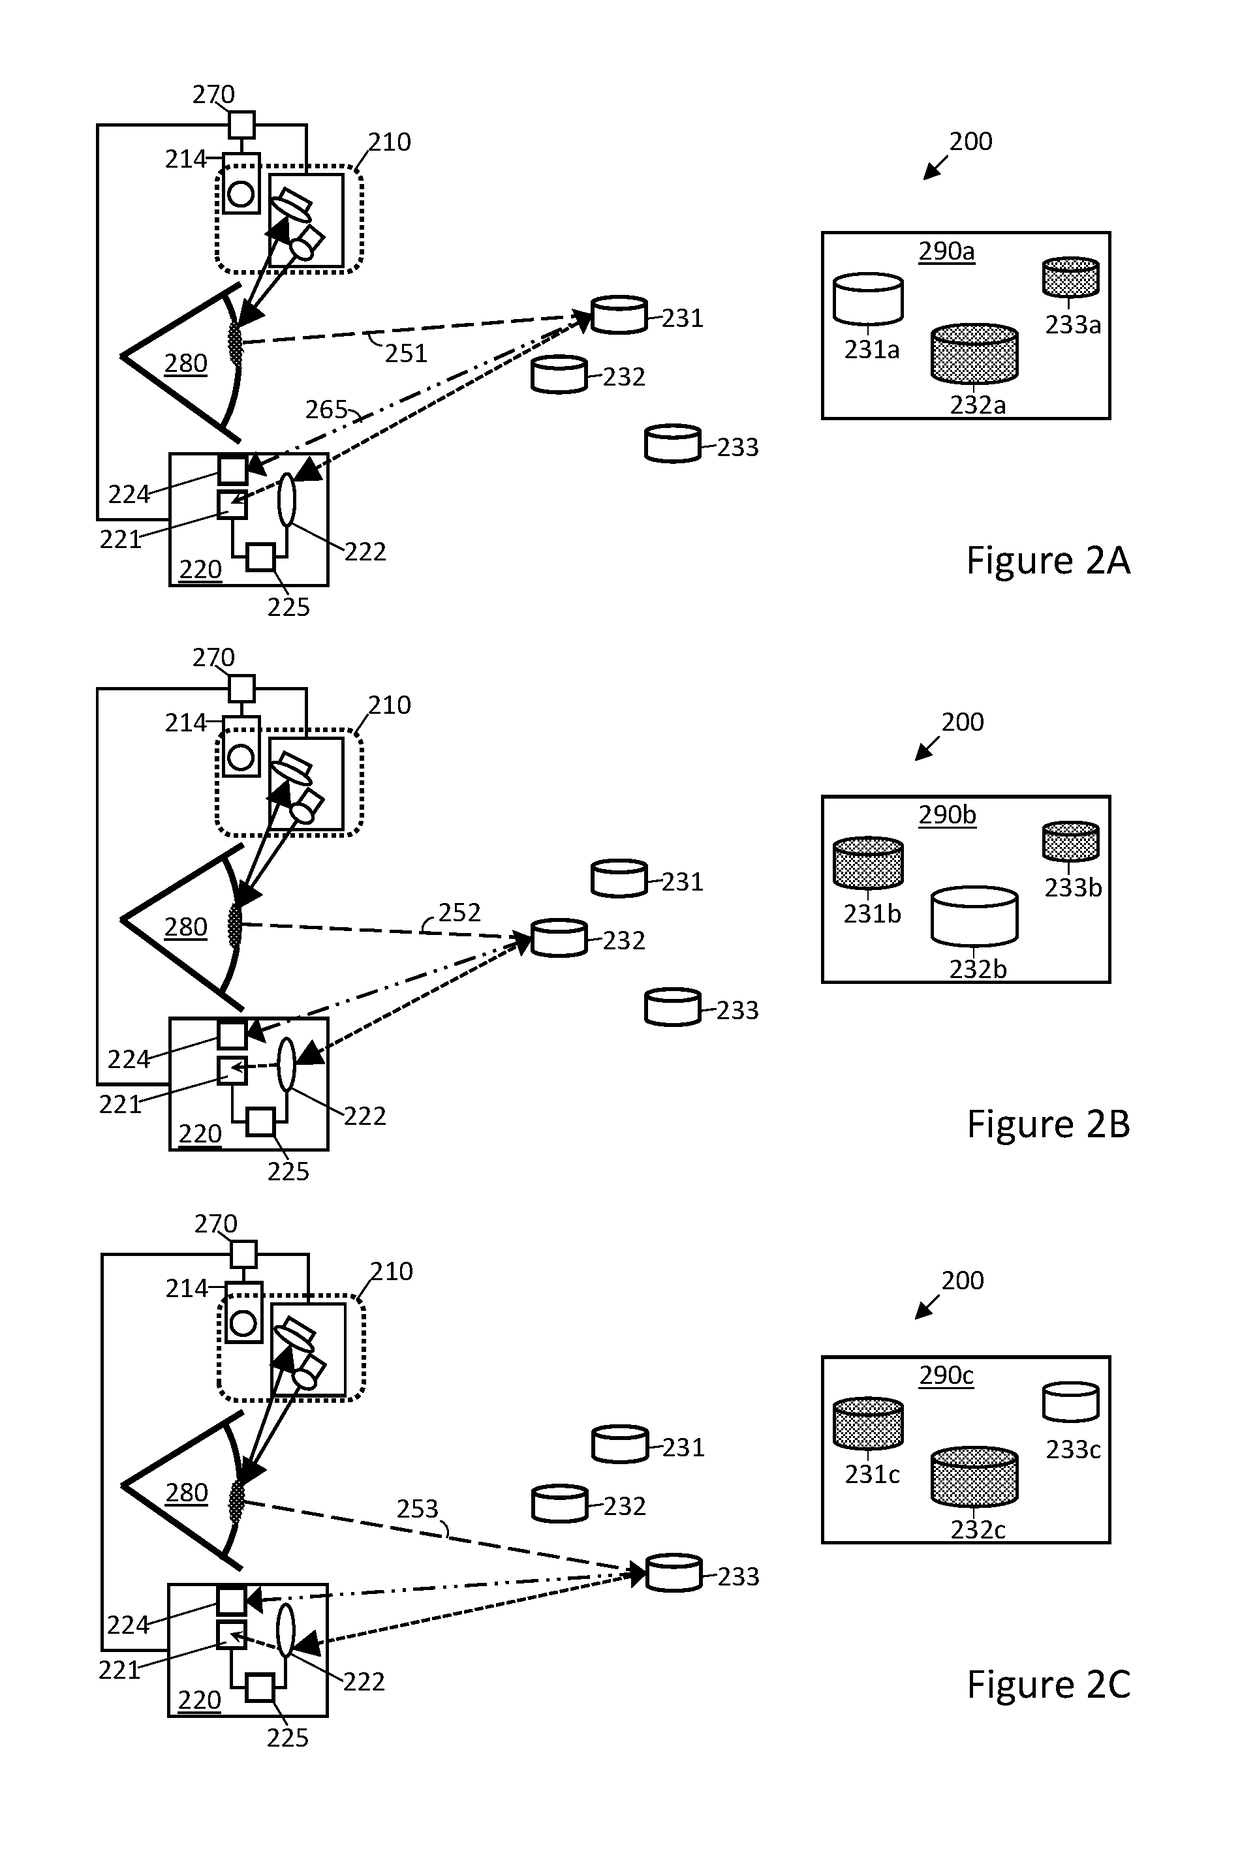 Image capture systems, devices, and methods that autofocus based on eye-tracking